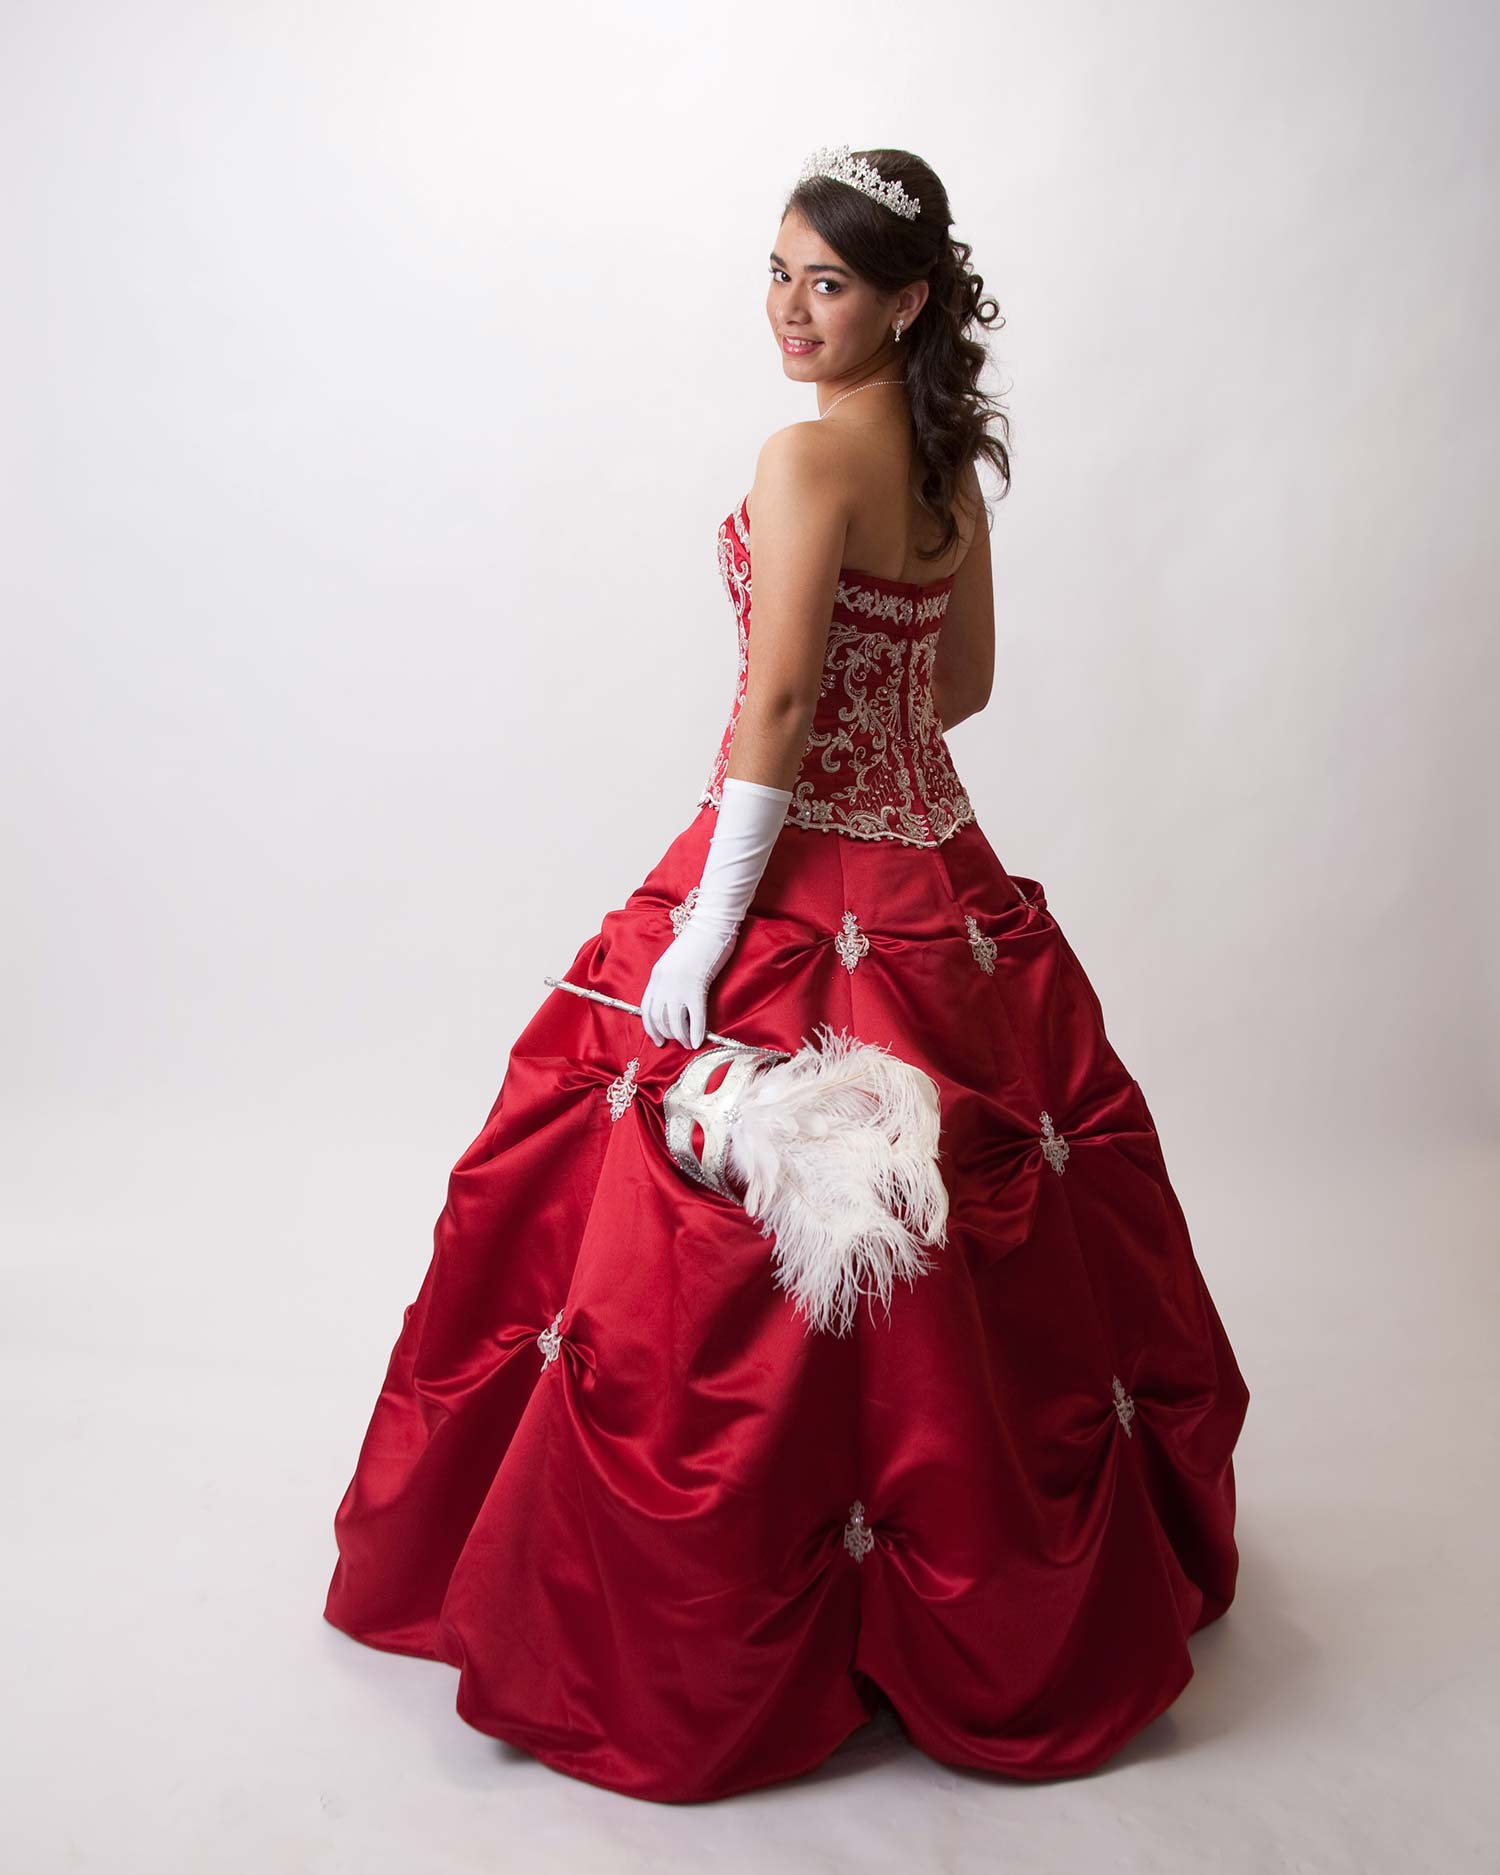 quinceanera-photography-packages-daytona-beach-orlando